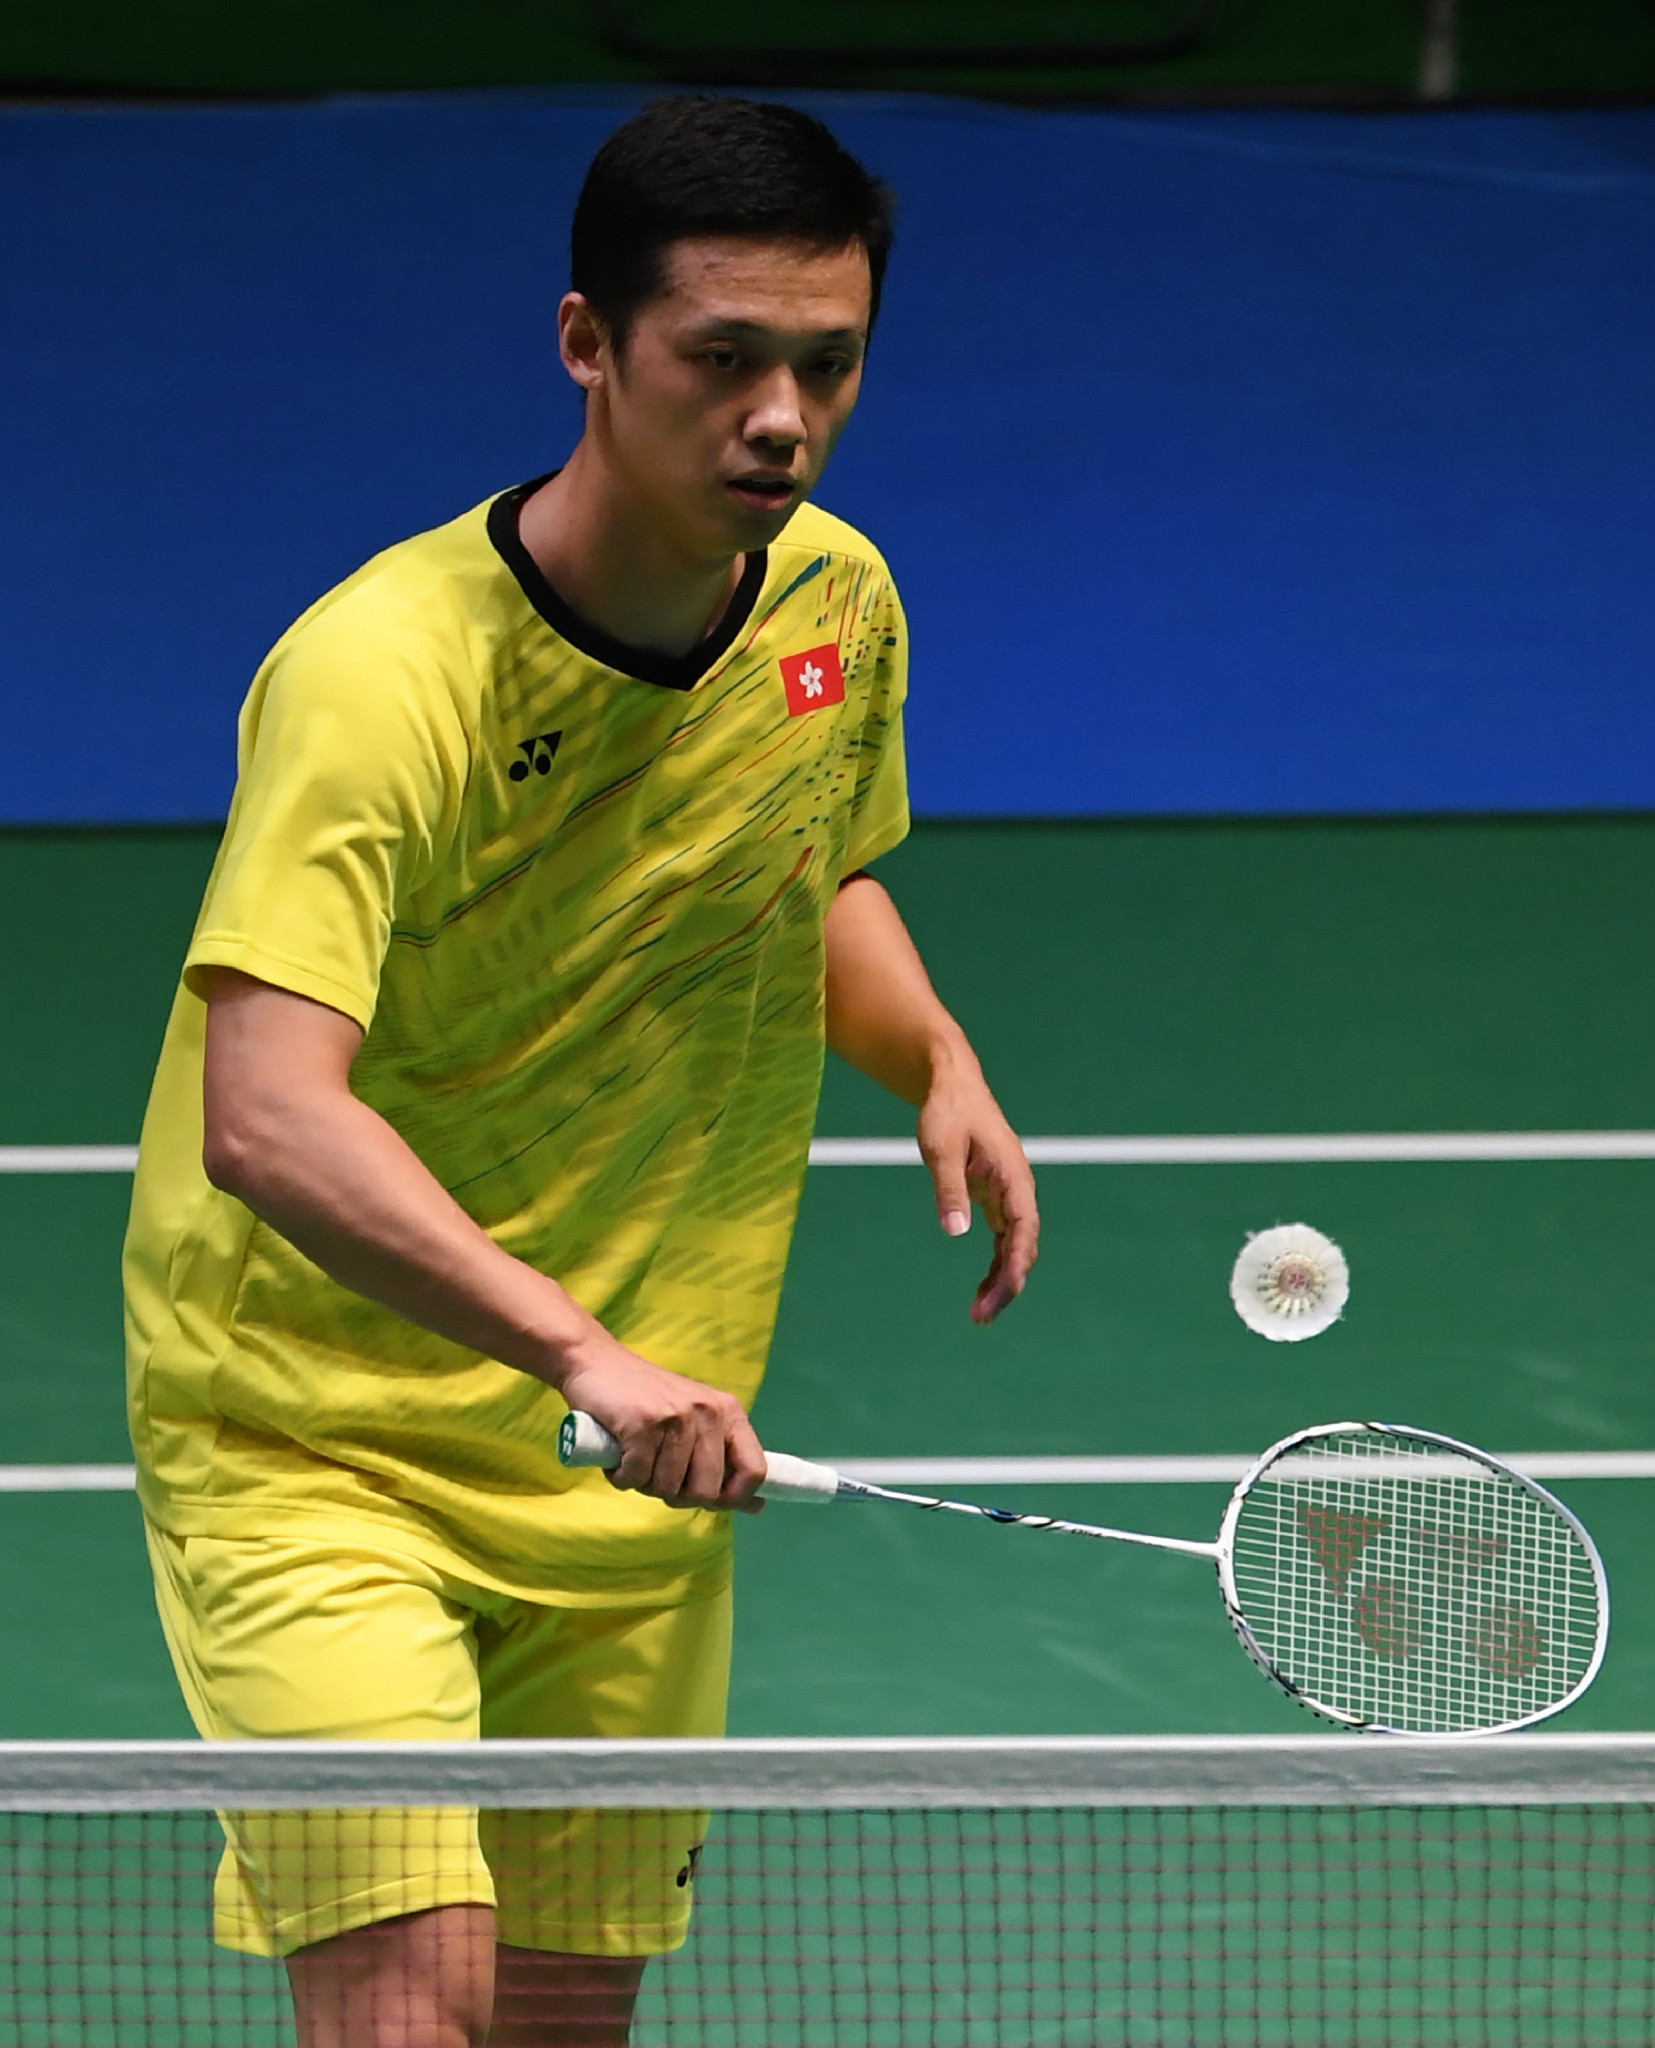 Hong Kong's Hu to face seventh seed Sugiarto in first round of Badminton Asia Championships